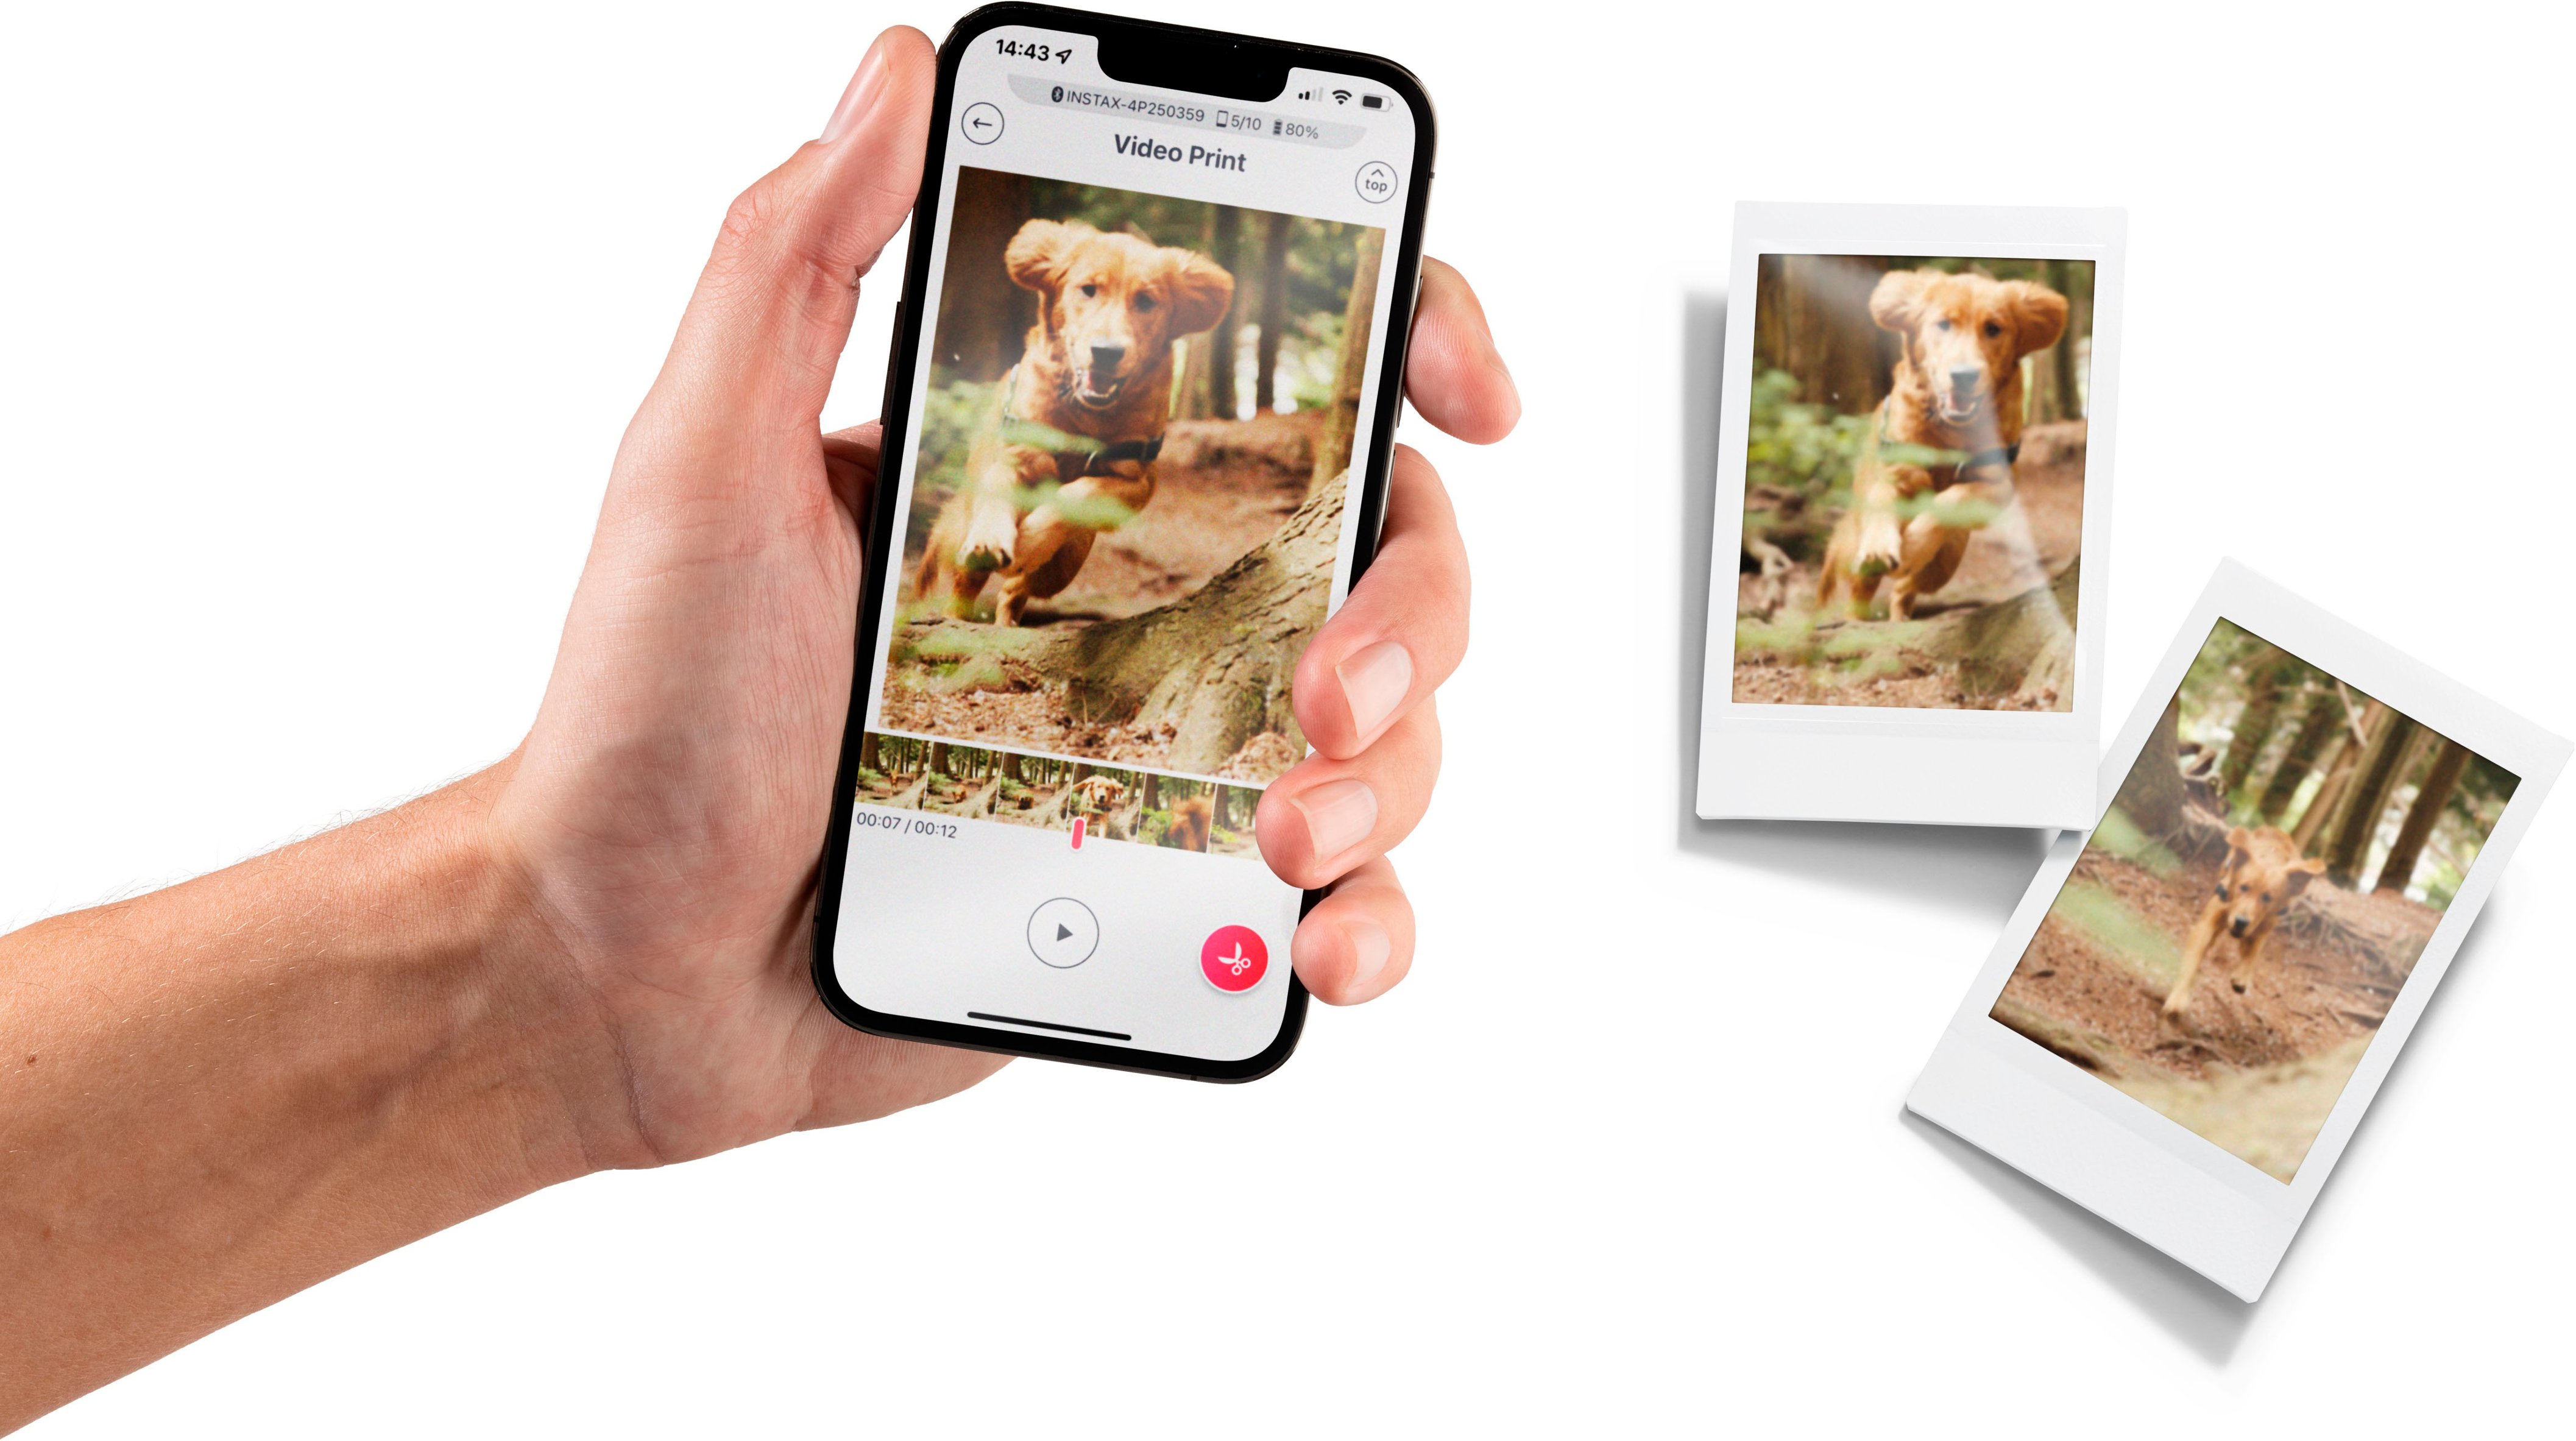 Fujifilm Instax Mini Link 2 Smartphone Photo Printer, Wireless, Portable,  and Lightweight Instant Film Printer, Bluetooth, Compatible on iPhone iOS  or